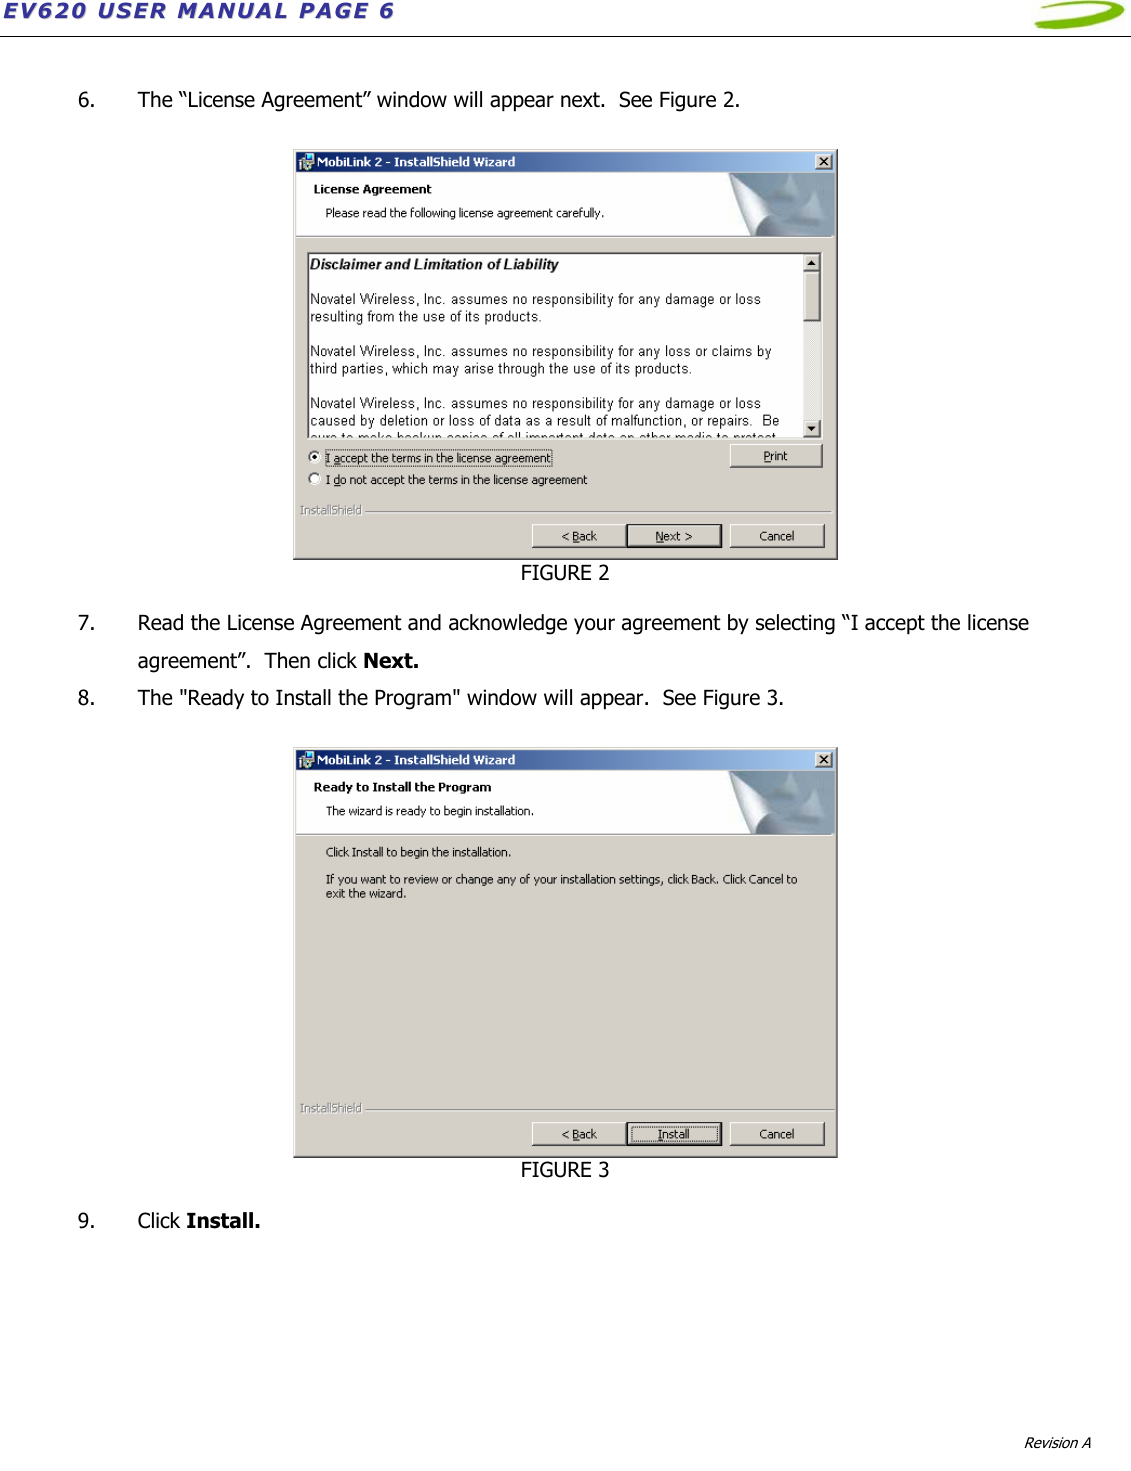 EEVV662200  UUSSEERR  MMAANNUUAALL  PPAAGGEE  66              Revision A    6. The “License Agreement” window will appear next.  See Figure 2.   FIGURE 2  7. Read the License Agreement and acknowledge your agreement by selecting “I accept the license agreement”.  Then click Next. 8. The &quot;Ready to Install the Program&quot; window will appear.  See Figure 3.   FIGURE 3  9. Click Install.  